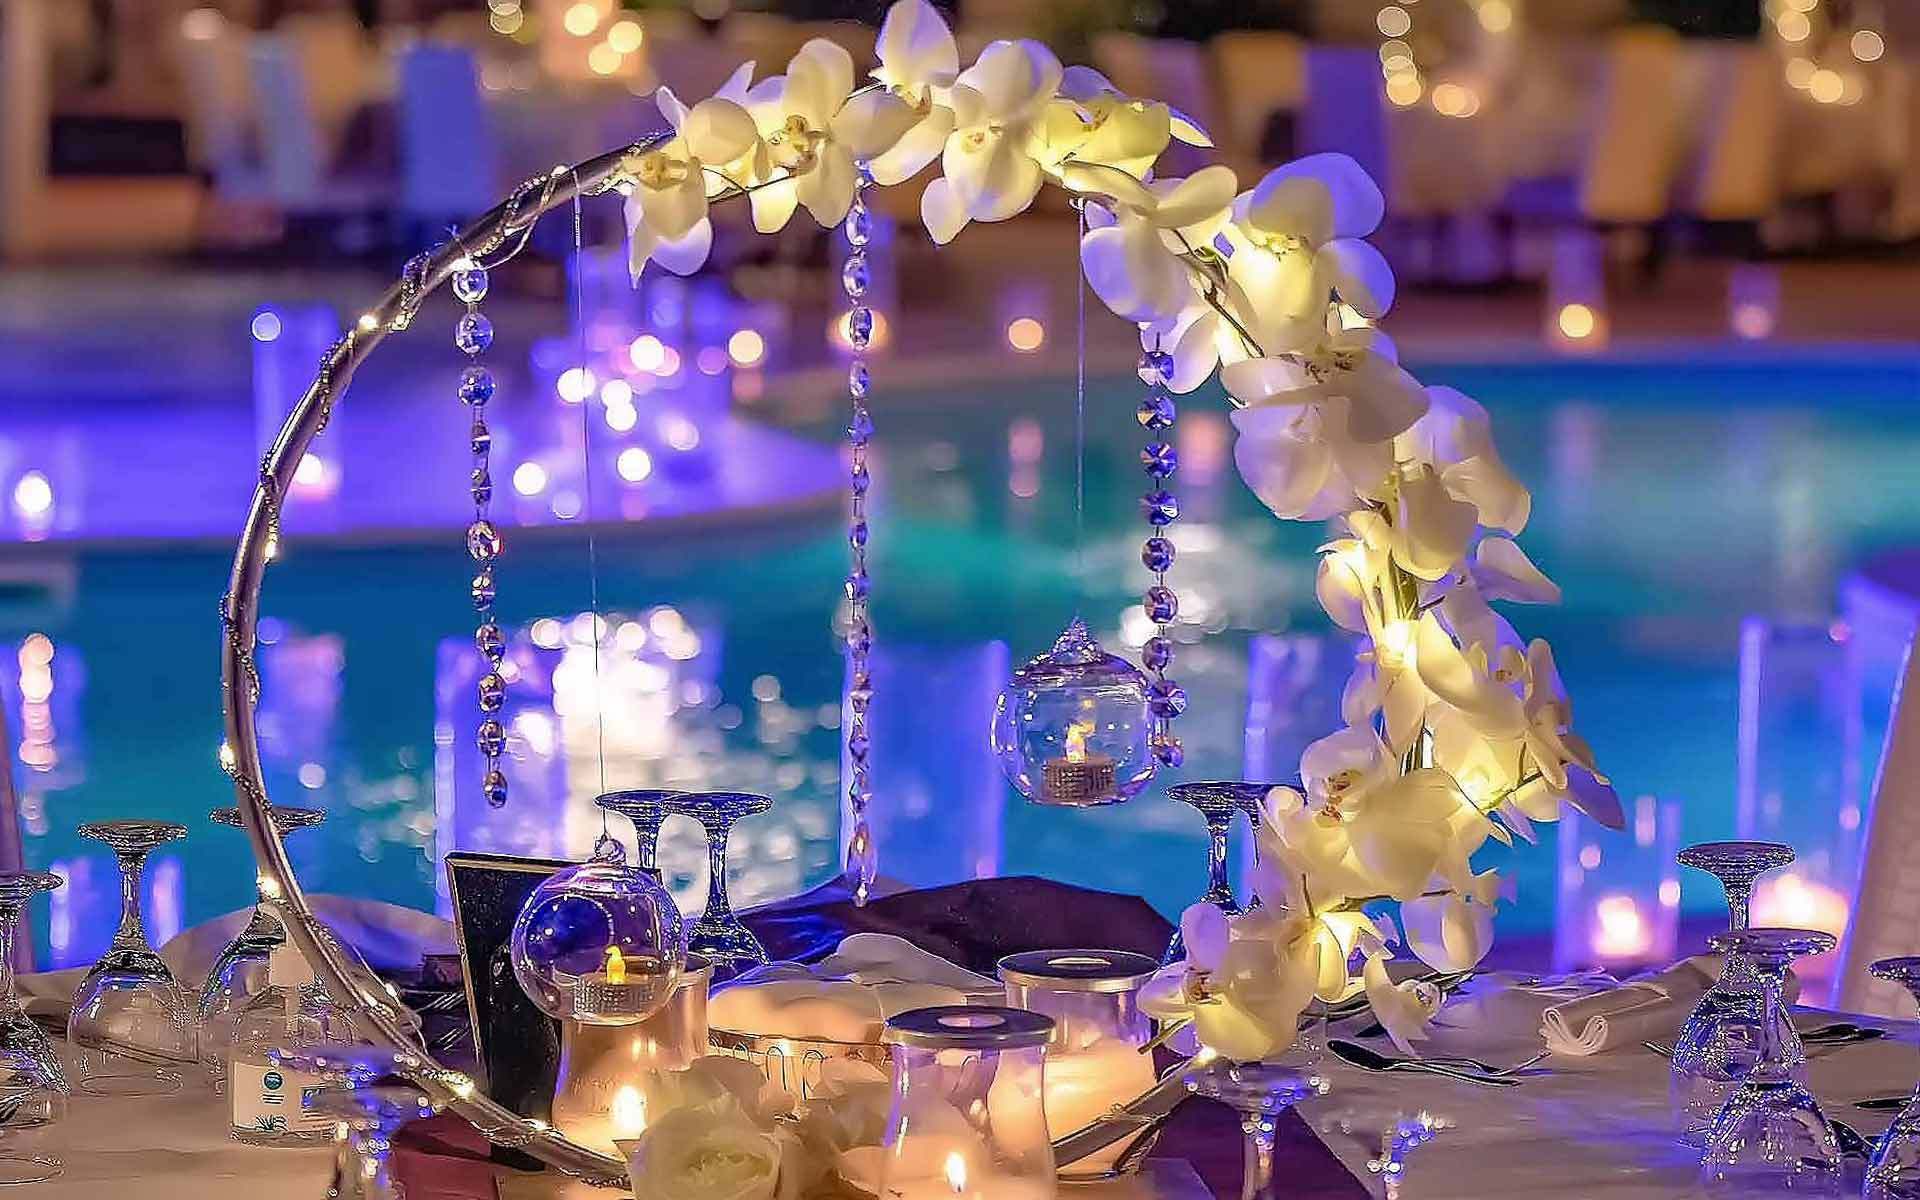 Wedding arch - metal round backdrop for wedding decor with hanging crystals & white Phaelaenopsis Orchids by Rogdaki Events Trademark